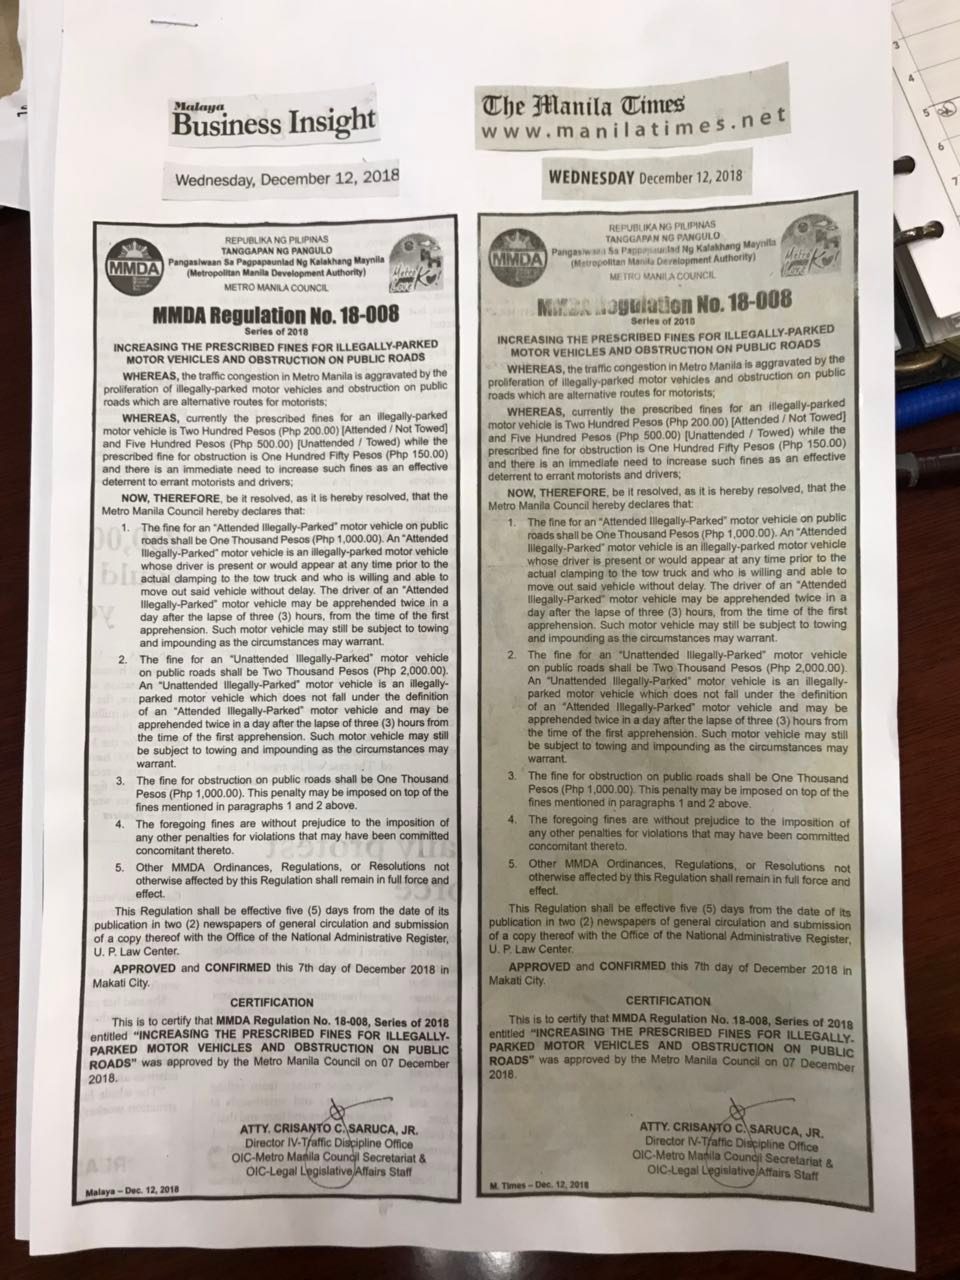 PUBLISHED. The MMDA published MMDA Regulation No. 18-008 on illegal parking on December 12, 2018 on newspapers Malaya Business Insight and Manila Times. Photo courtesy of MMDA 